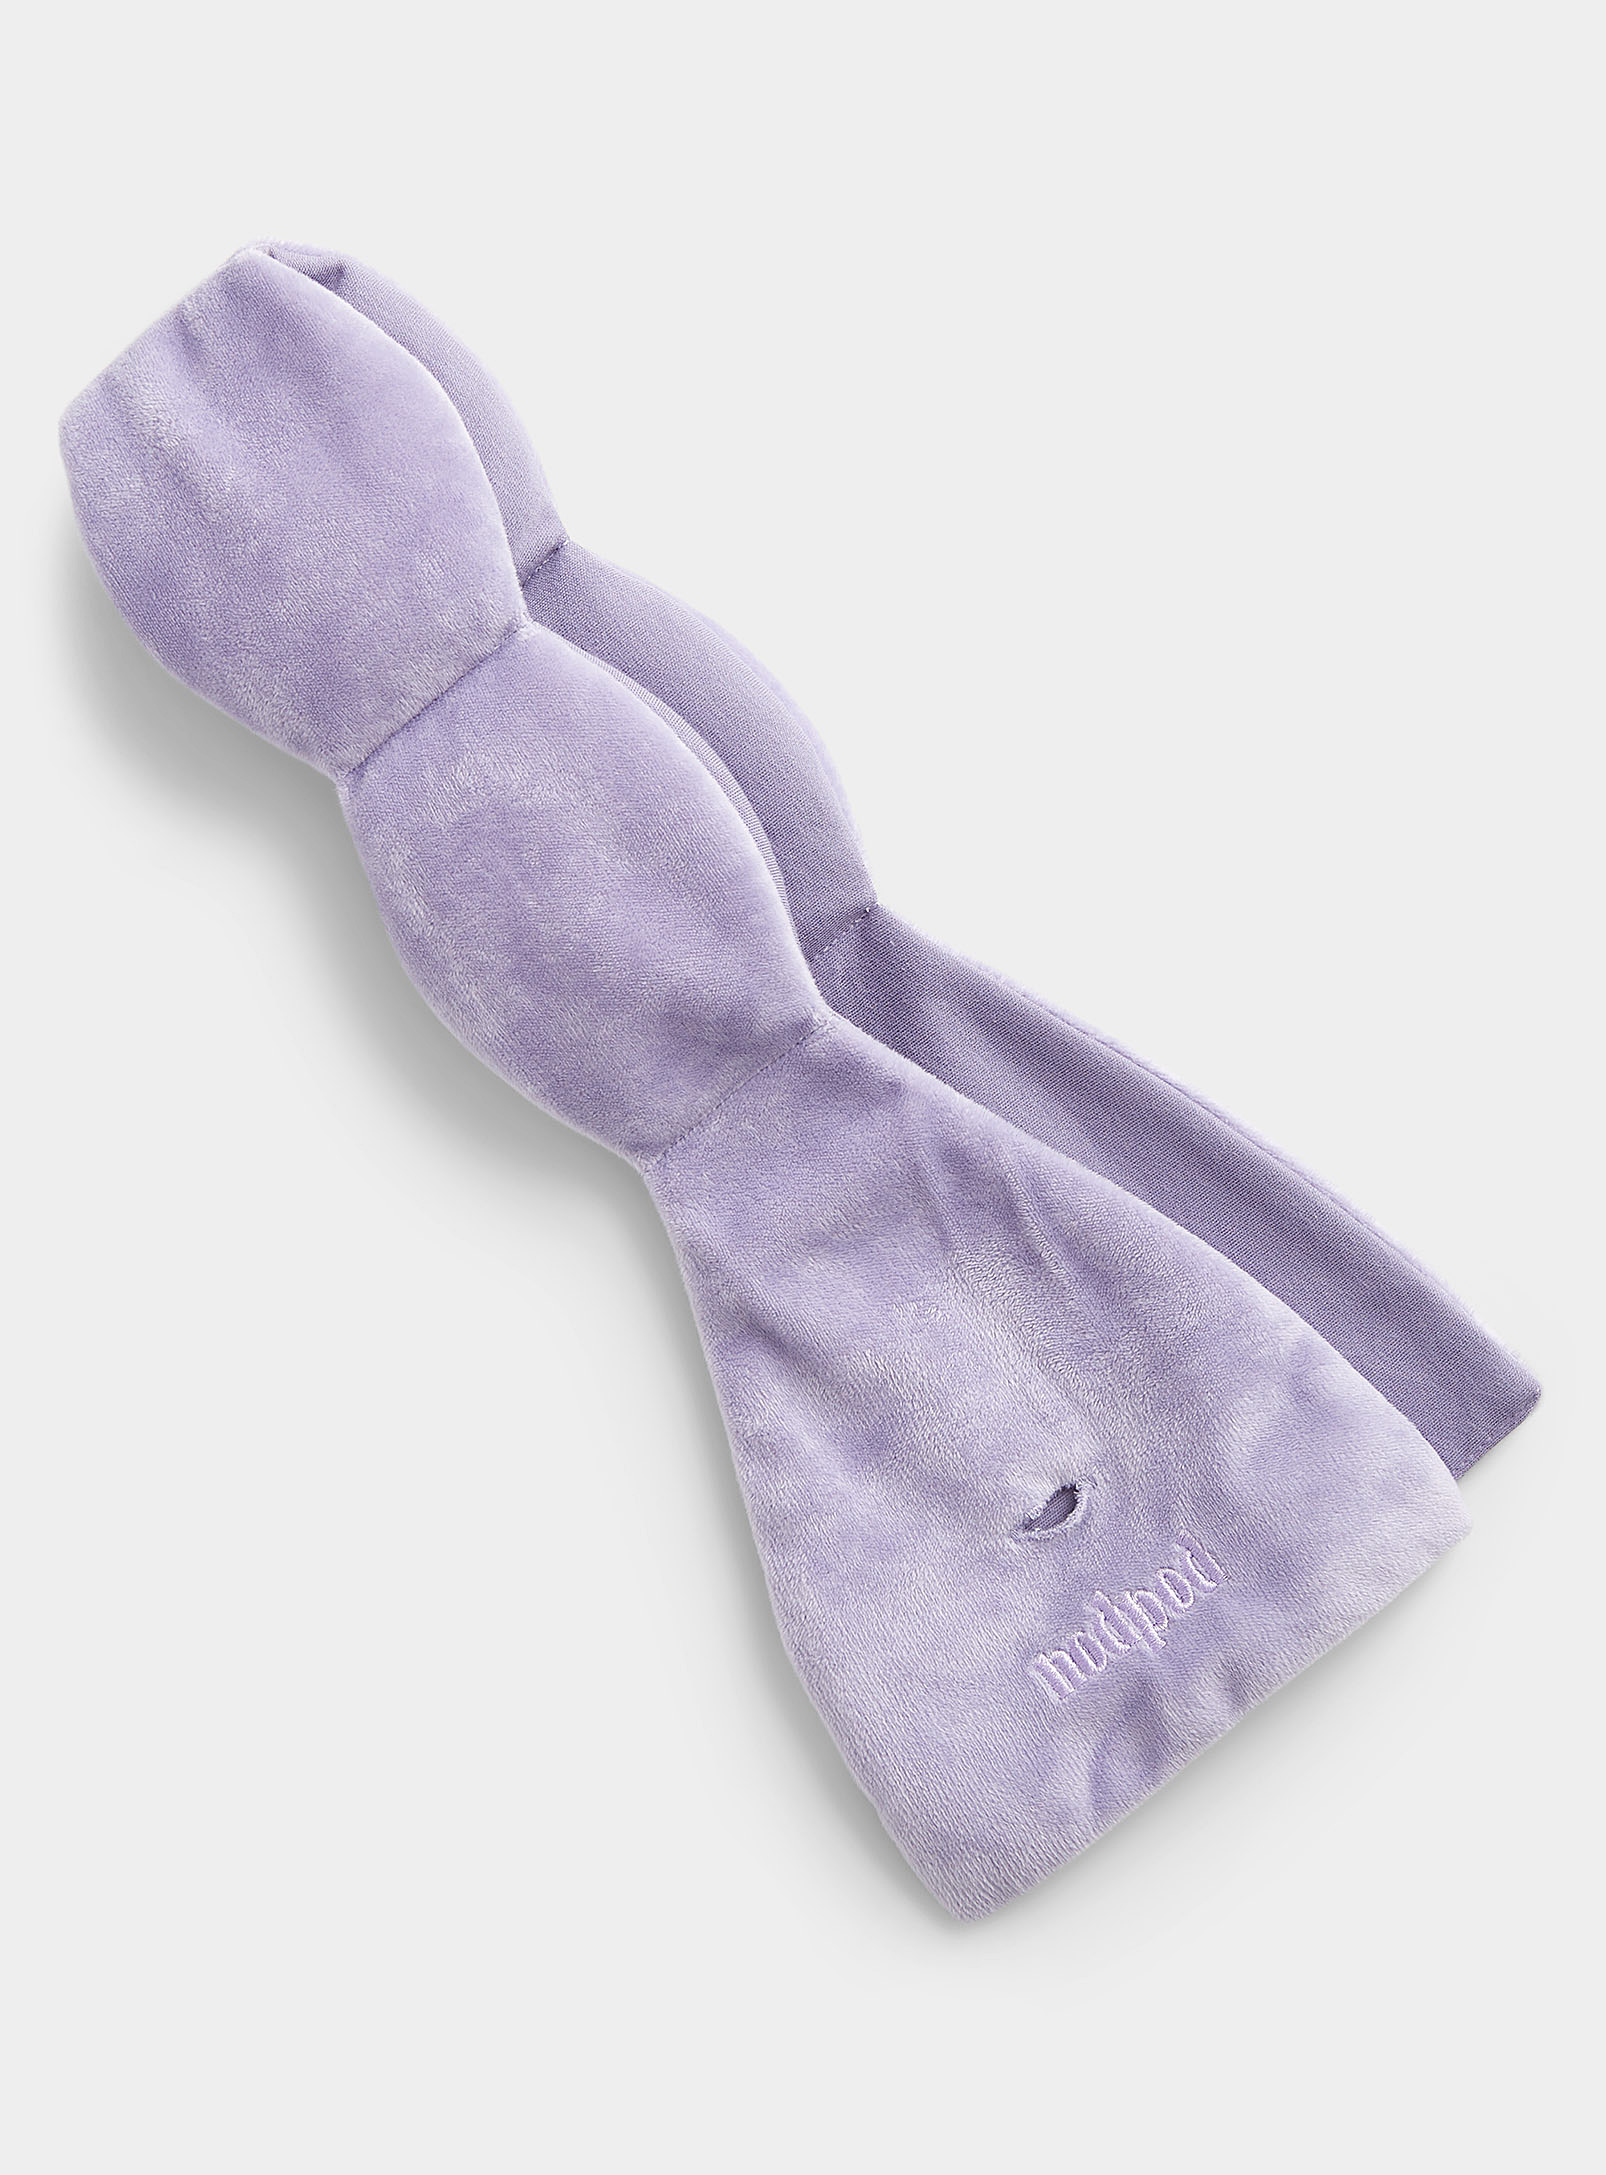 Nodpod Weighted Sleeping Mask In Lilacs